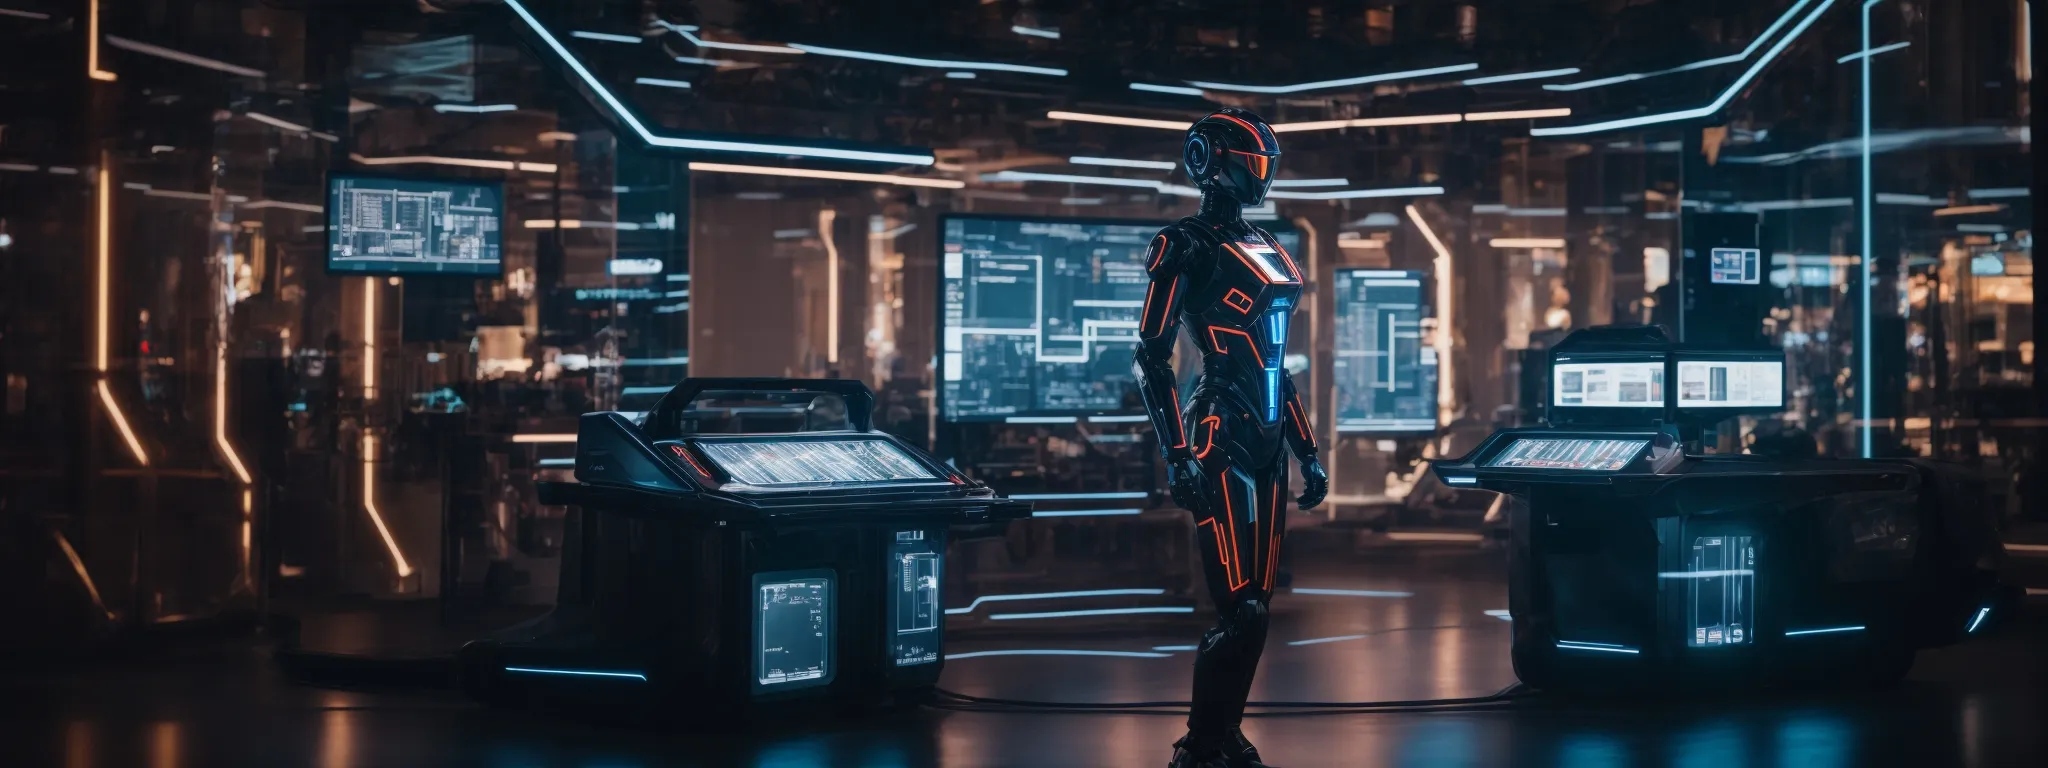 a sleek, futuristic robot surrounded by various illuminated digital screens showcasing advanced technology interfaces.